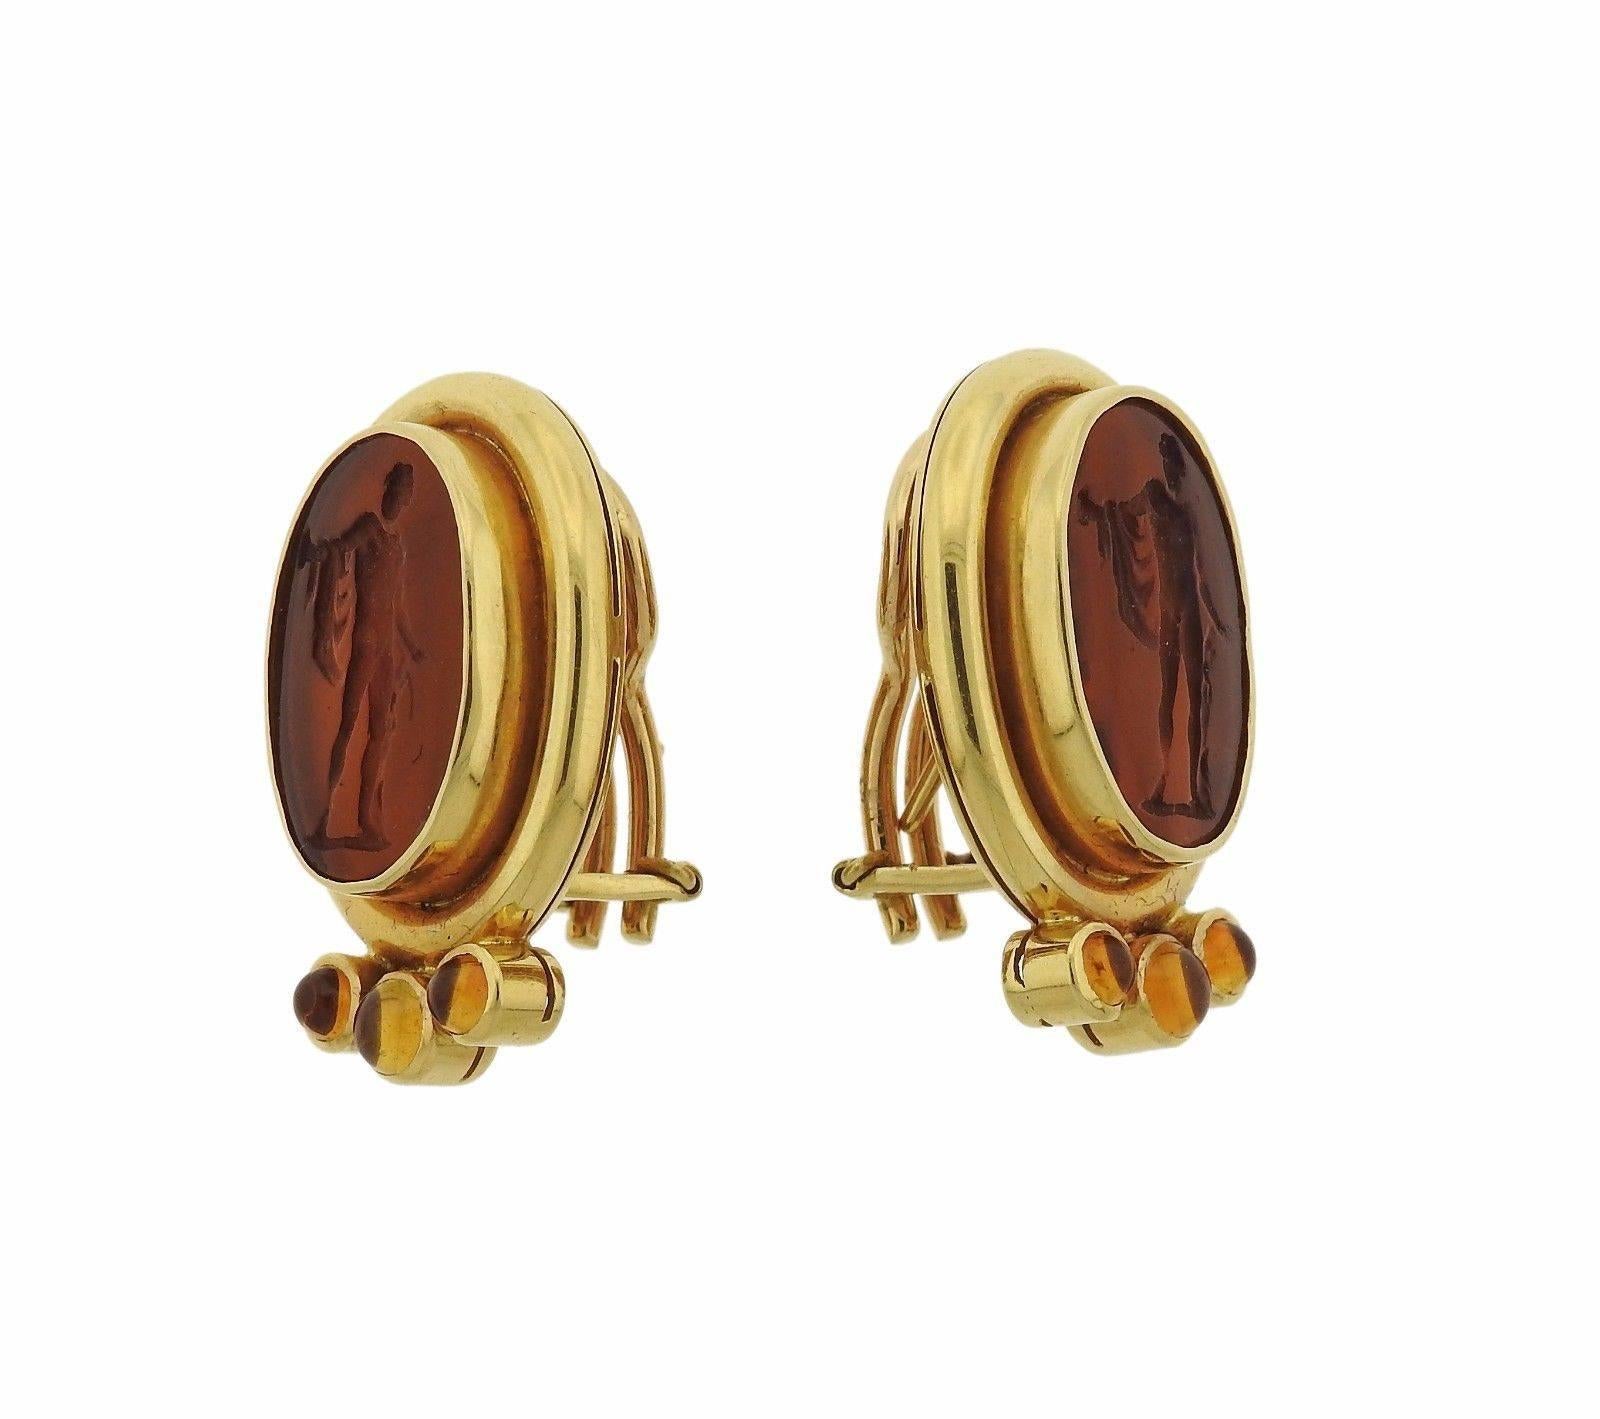 A pair of 18k gold earrings set with citrines and Venetian glass intaglio.  The earrings are 27mm x 17mm and weigh 17.3 grams.  Marked: 18k Locke mark.